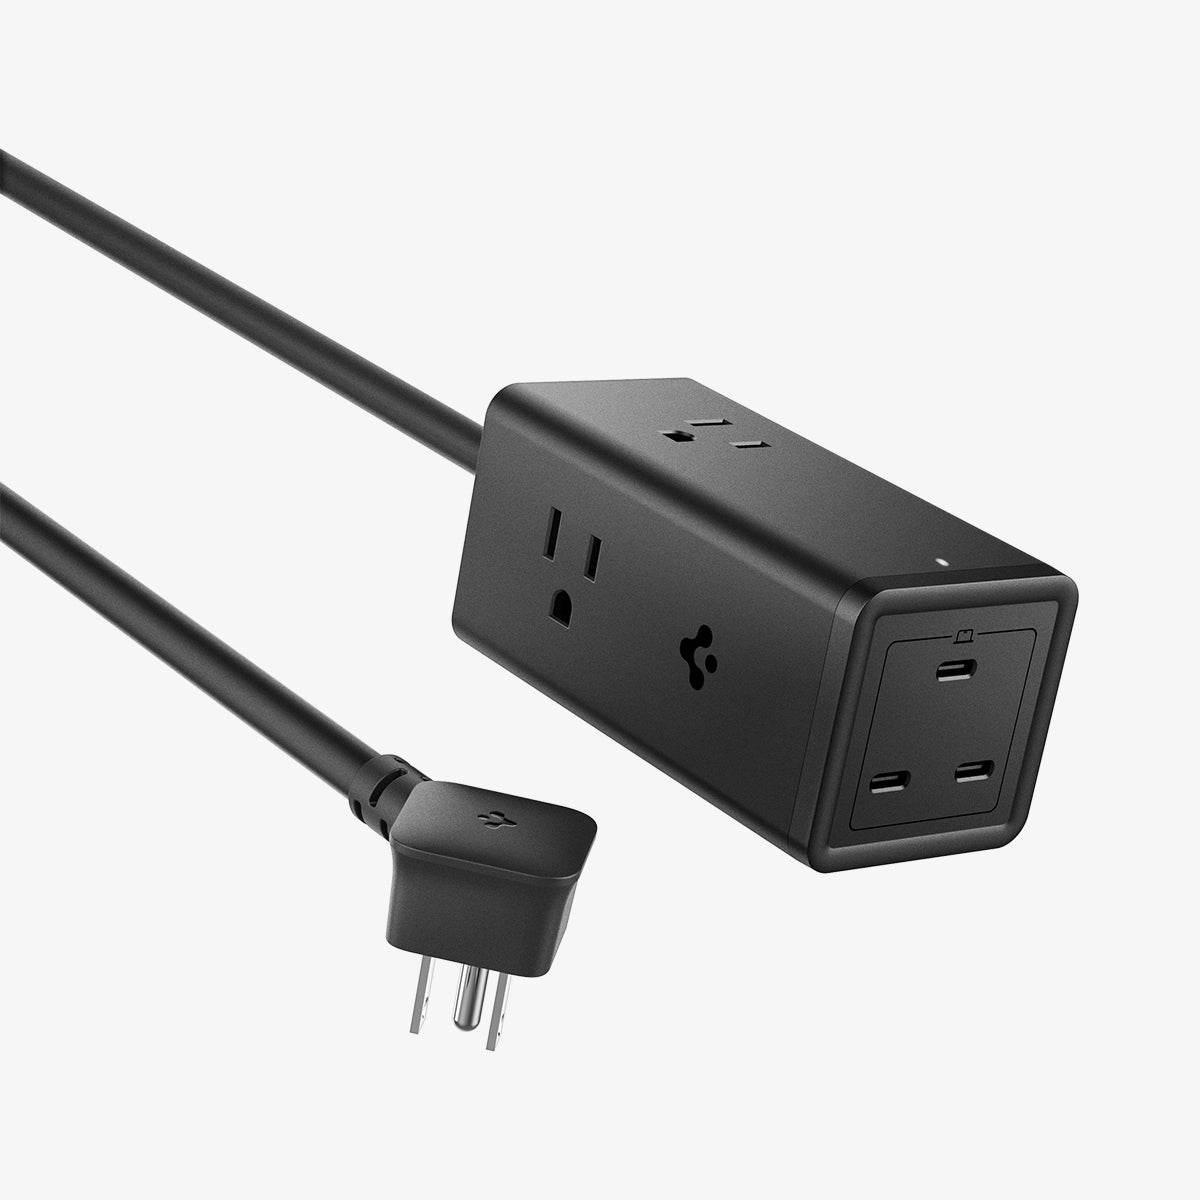 ACH05942 - ArcDock 70W Desktop Charger PD2102 in Black showing the top and sides with its cable and 3-prong receptacle